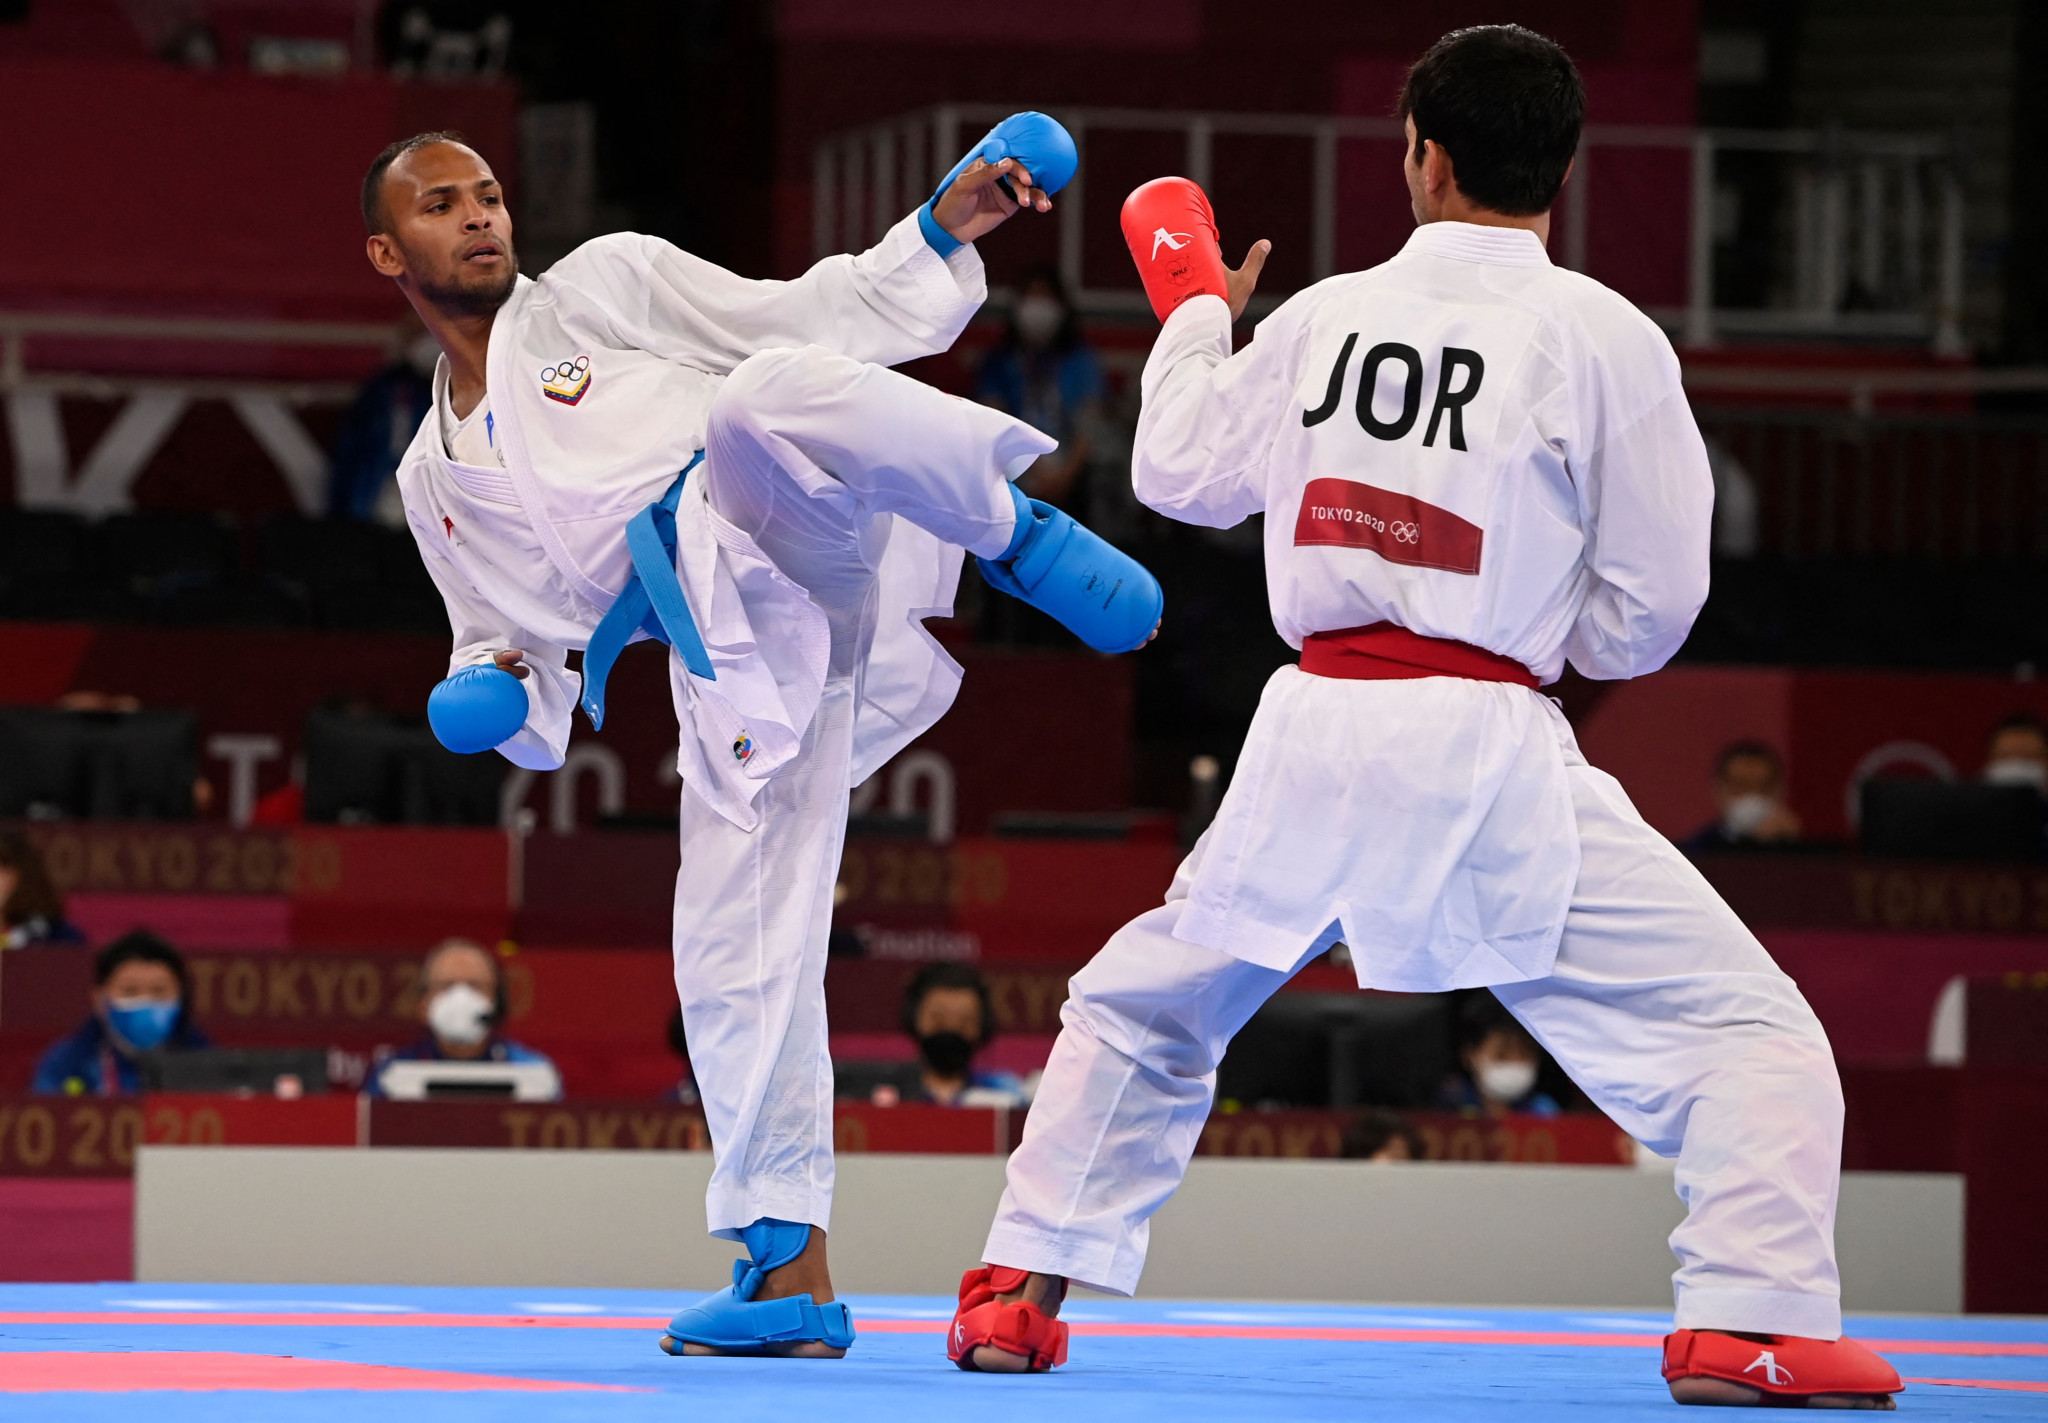 Karate made its Olympic debut at Tokyo 2020 but has not retained its place at the Games ©Getty Images